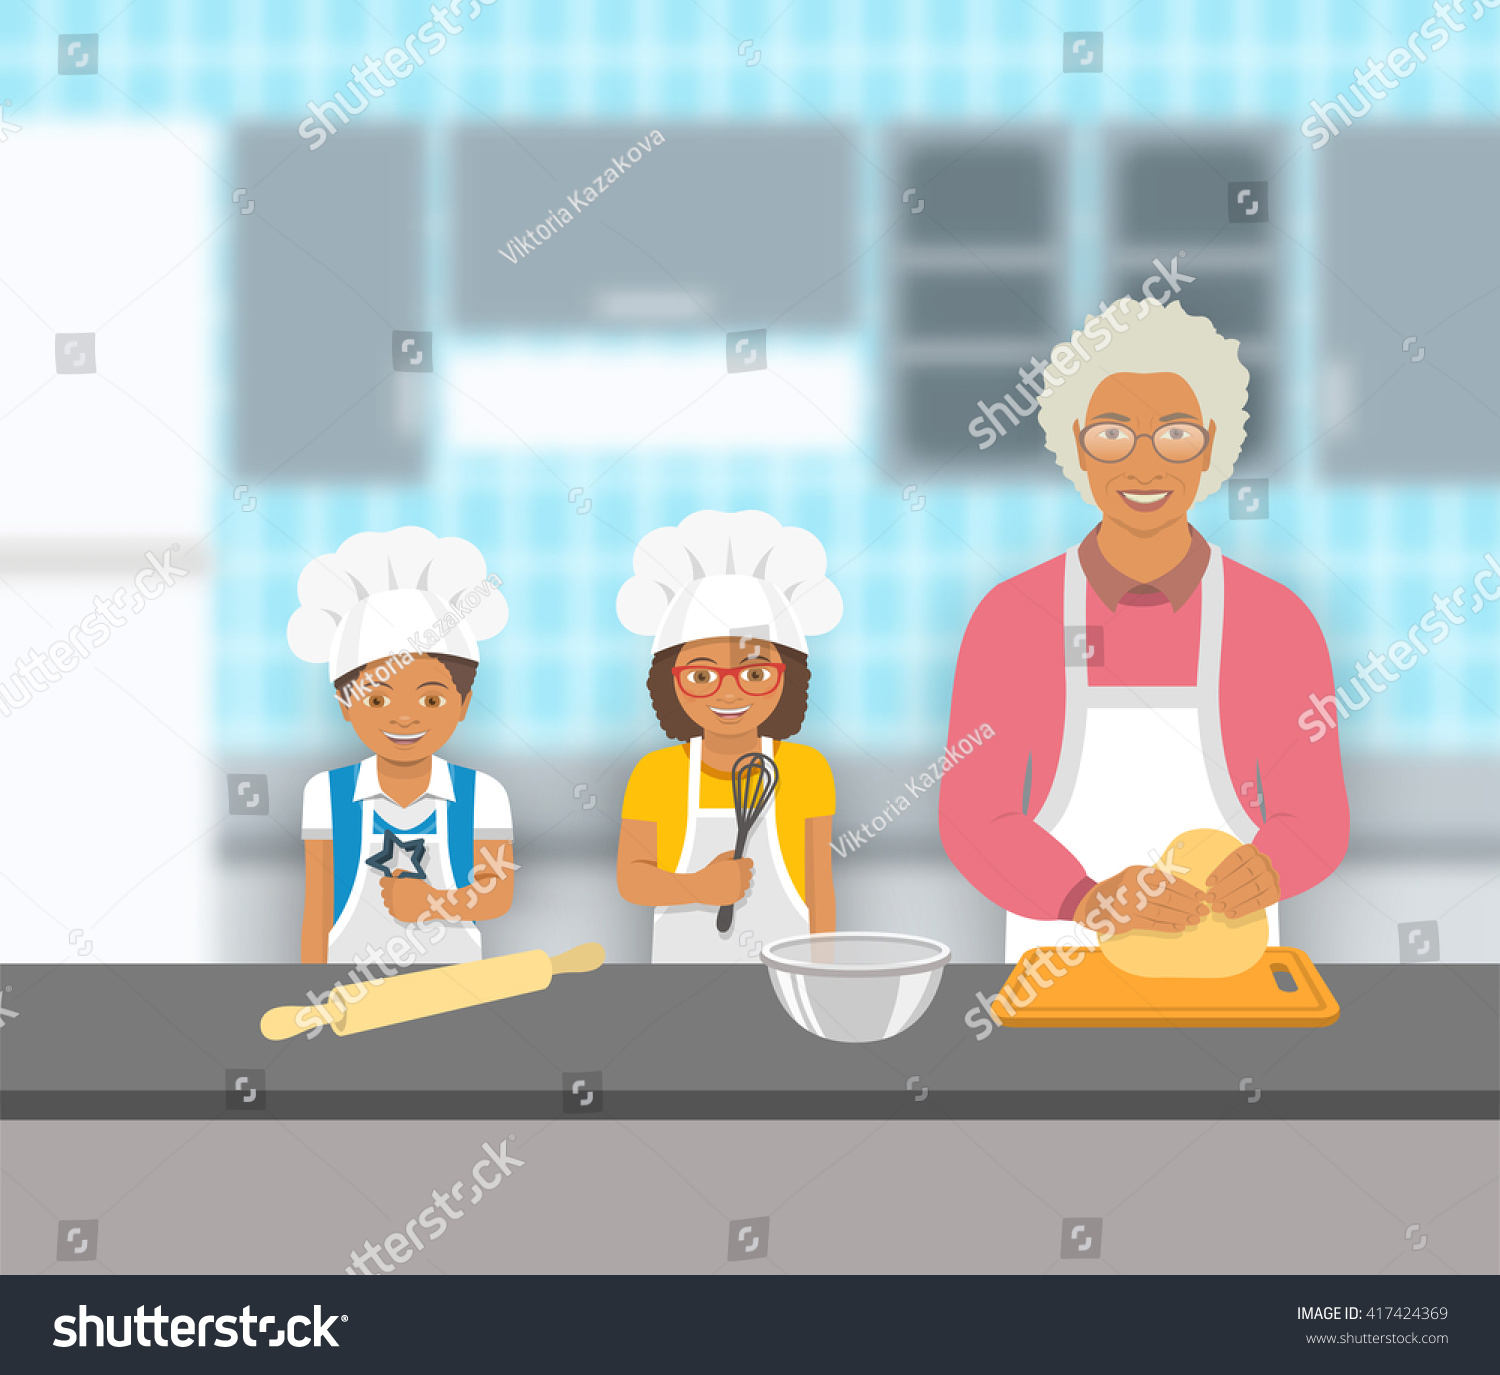 Cooking Granny